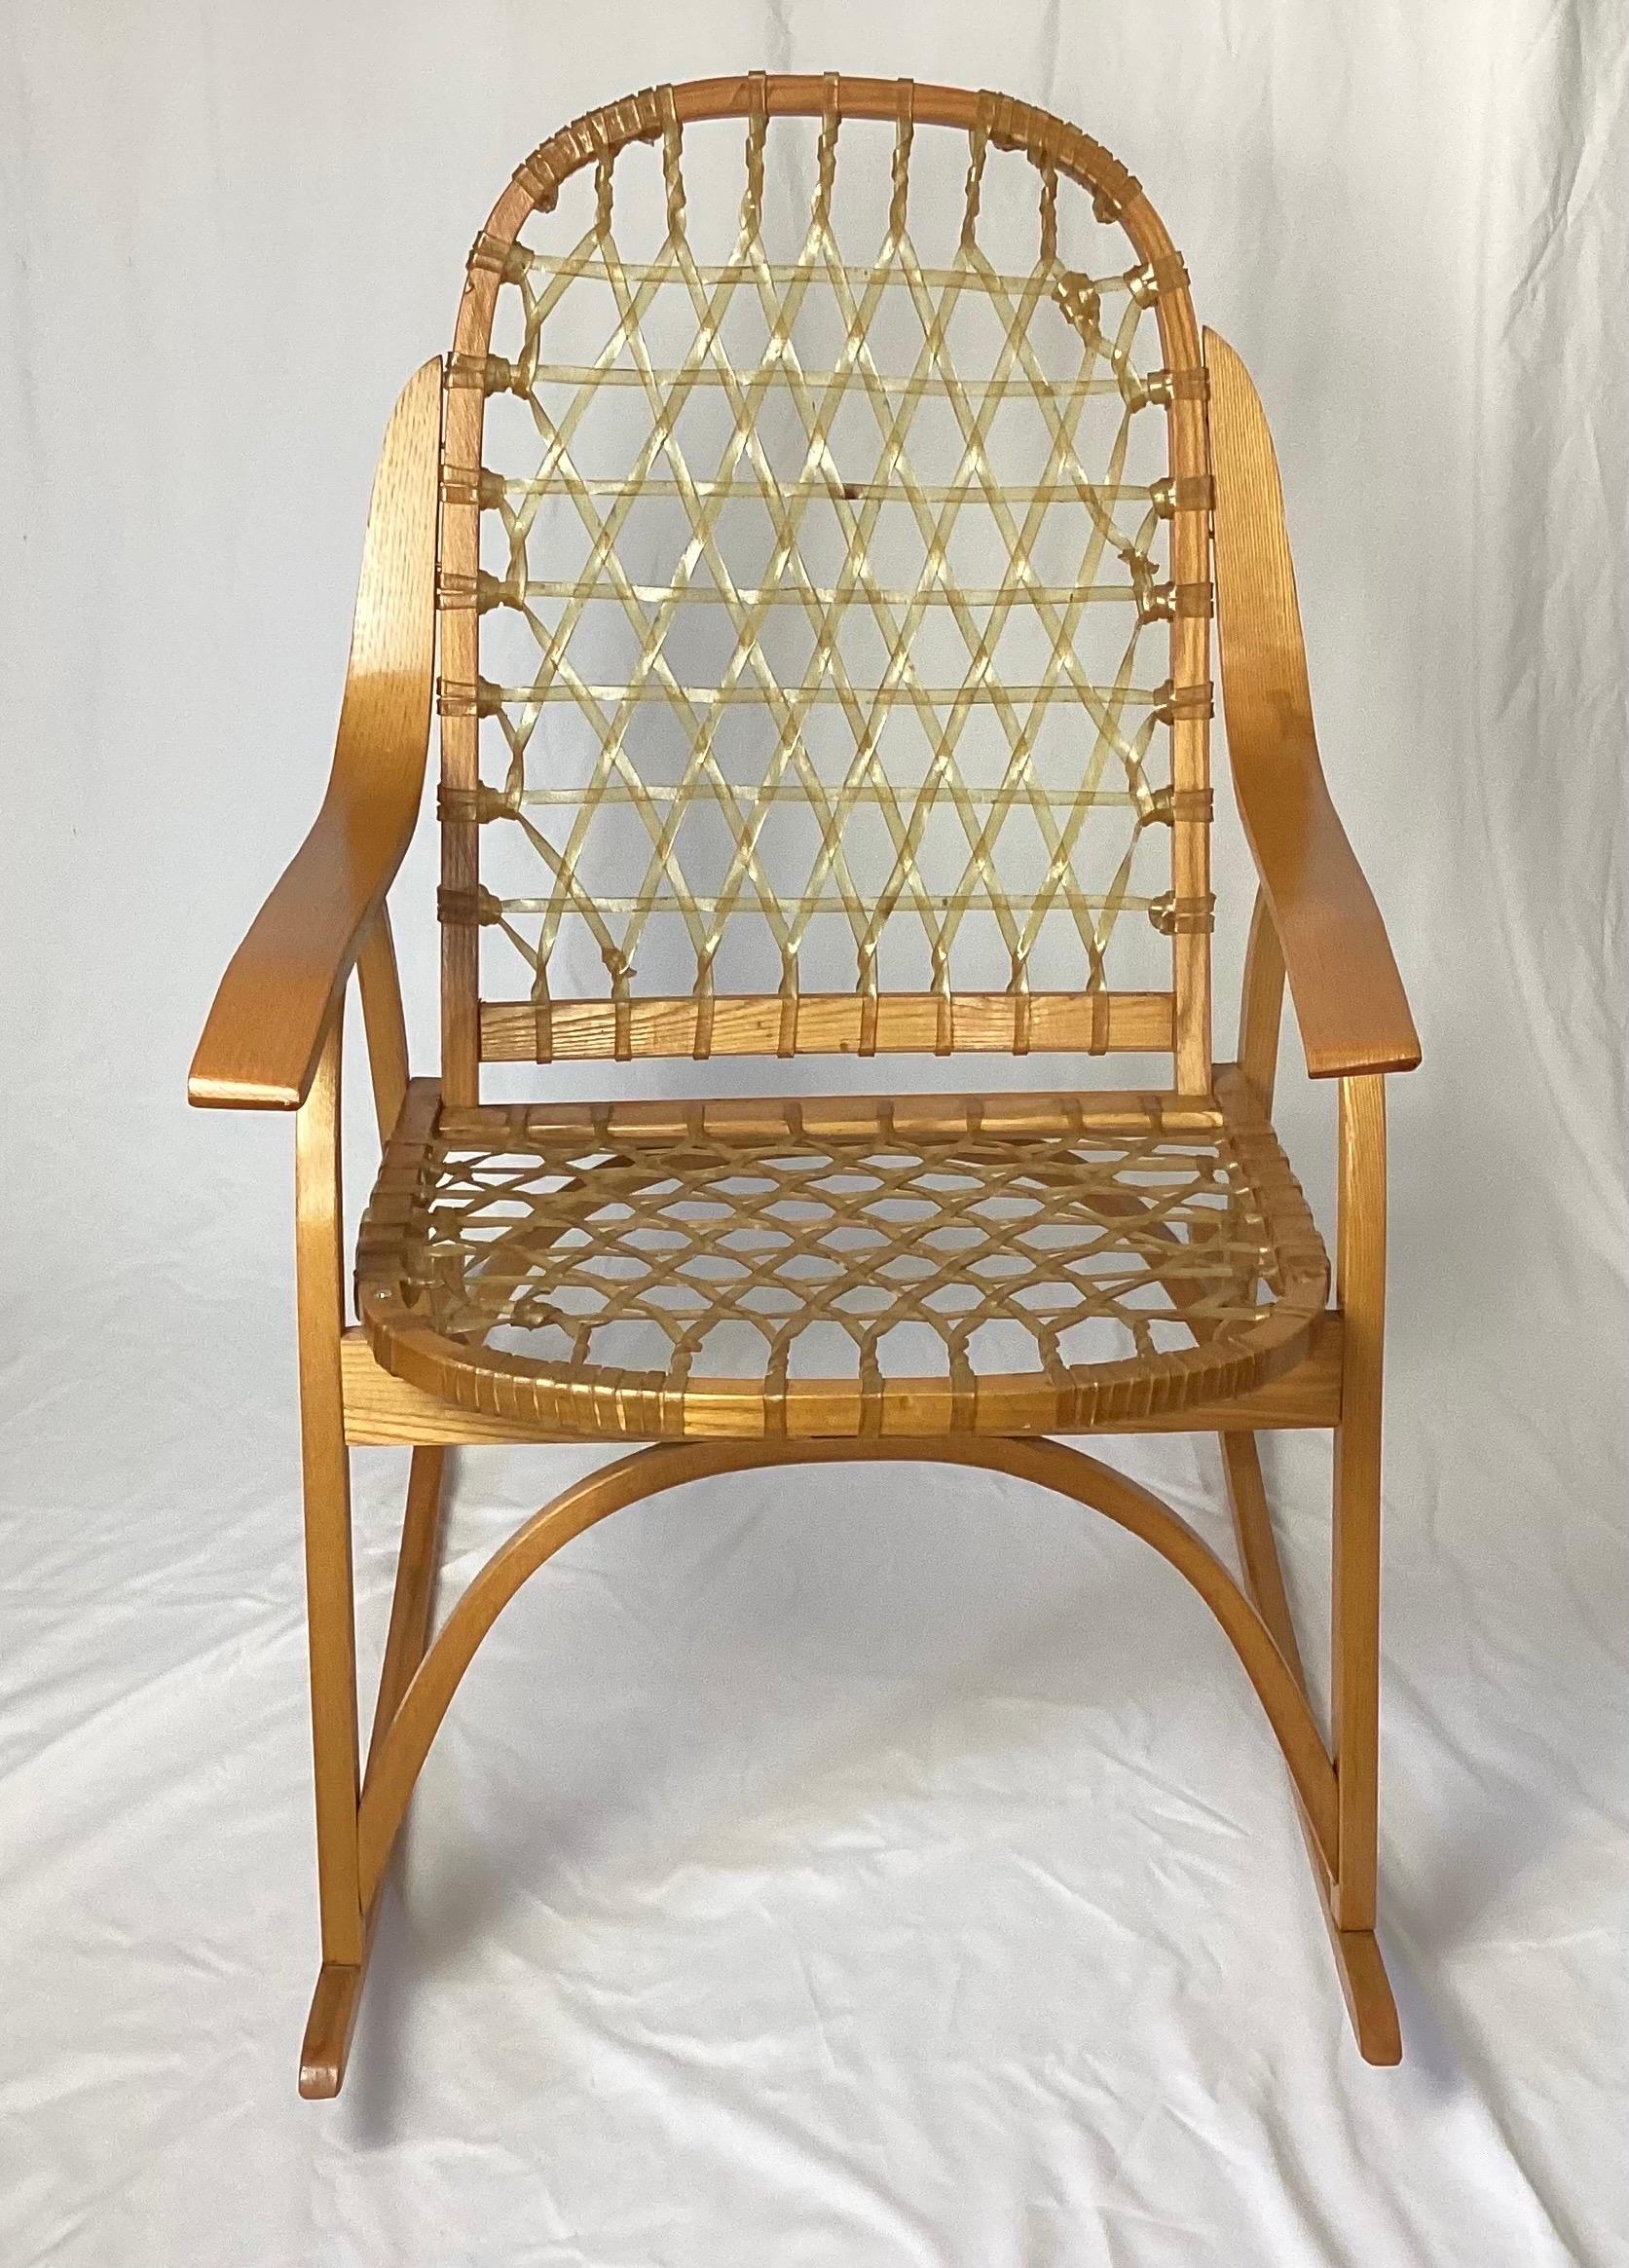 Vintage Snowshoe Rocking Chair by SnoCraft, Norway Maine. Great look for your cabin or mountain home. Excellent condition. Check our other listings for more SnoCraft furniture.